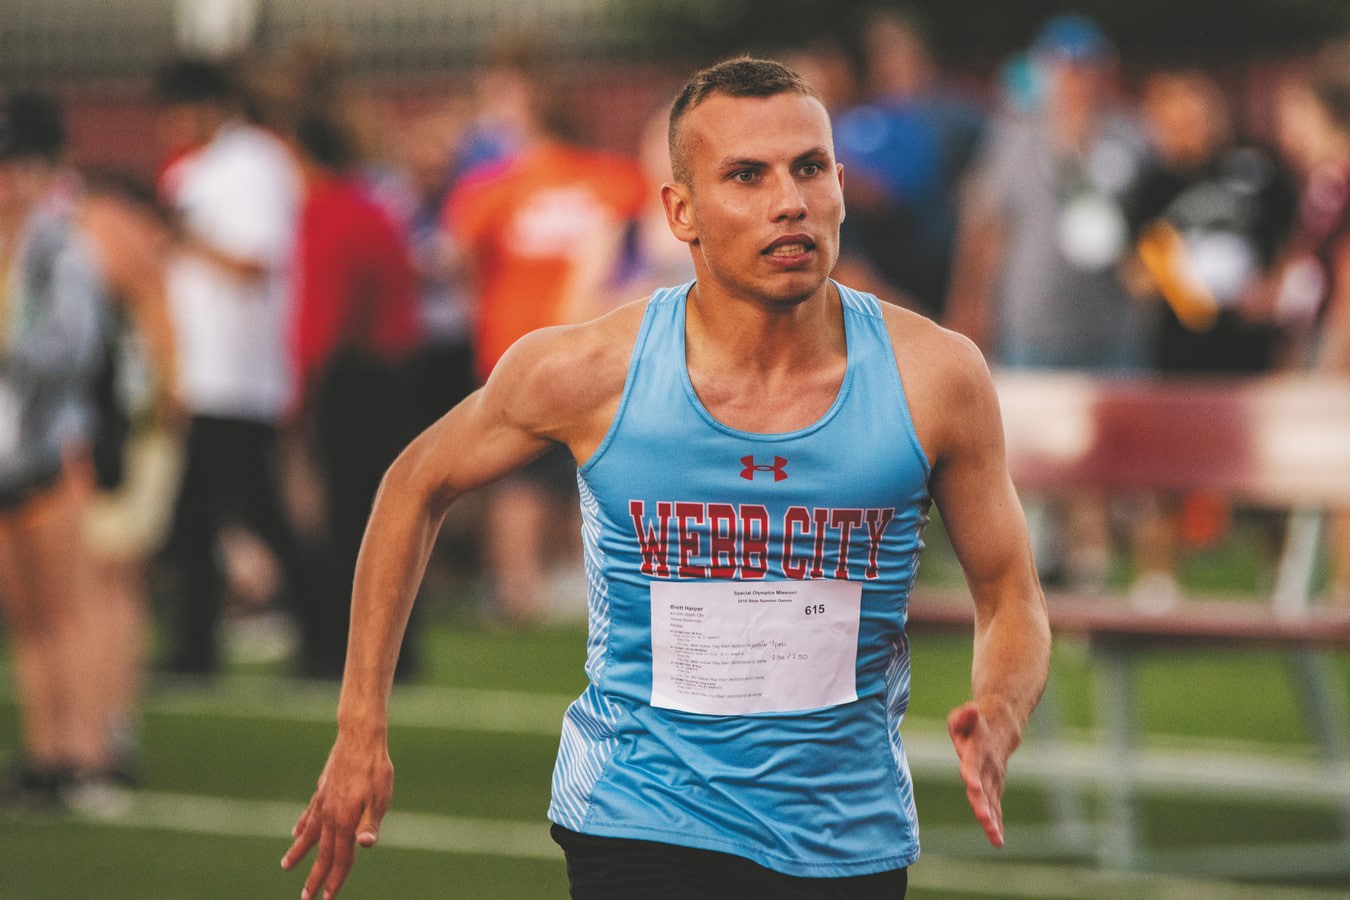 An athlete from Webb City runs in a track and field race with a look of focus on their face